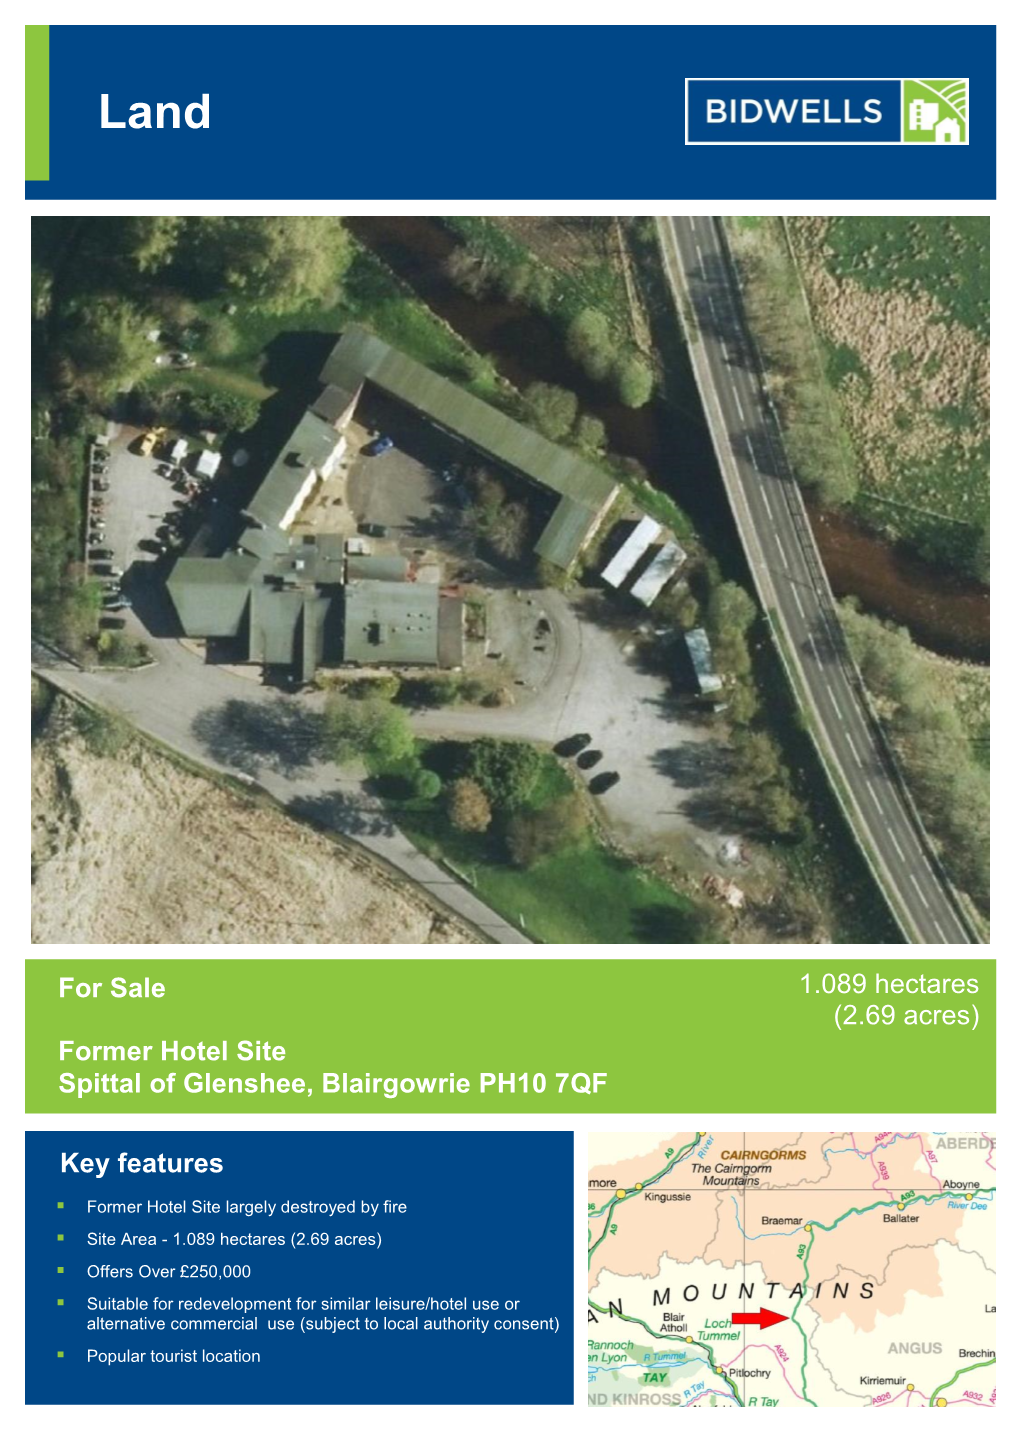 For Sale Former Hotel Site Spittal of Glenshee, Blairgowrie PH10 7QF Key Features 1.089 Hectares (2.69 Acres)